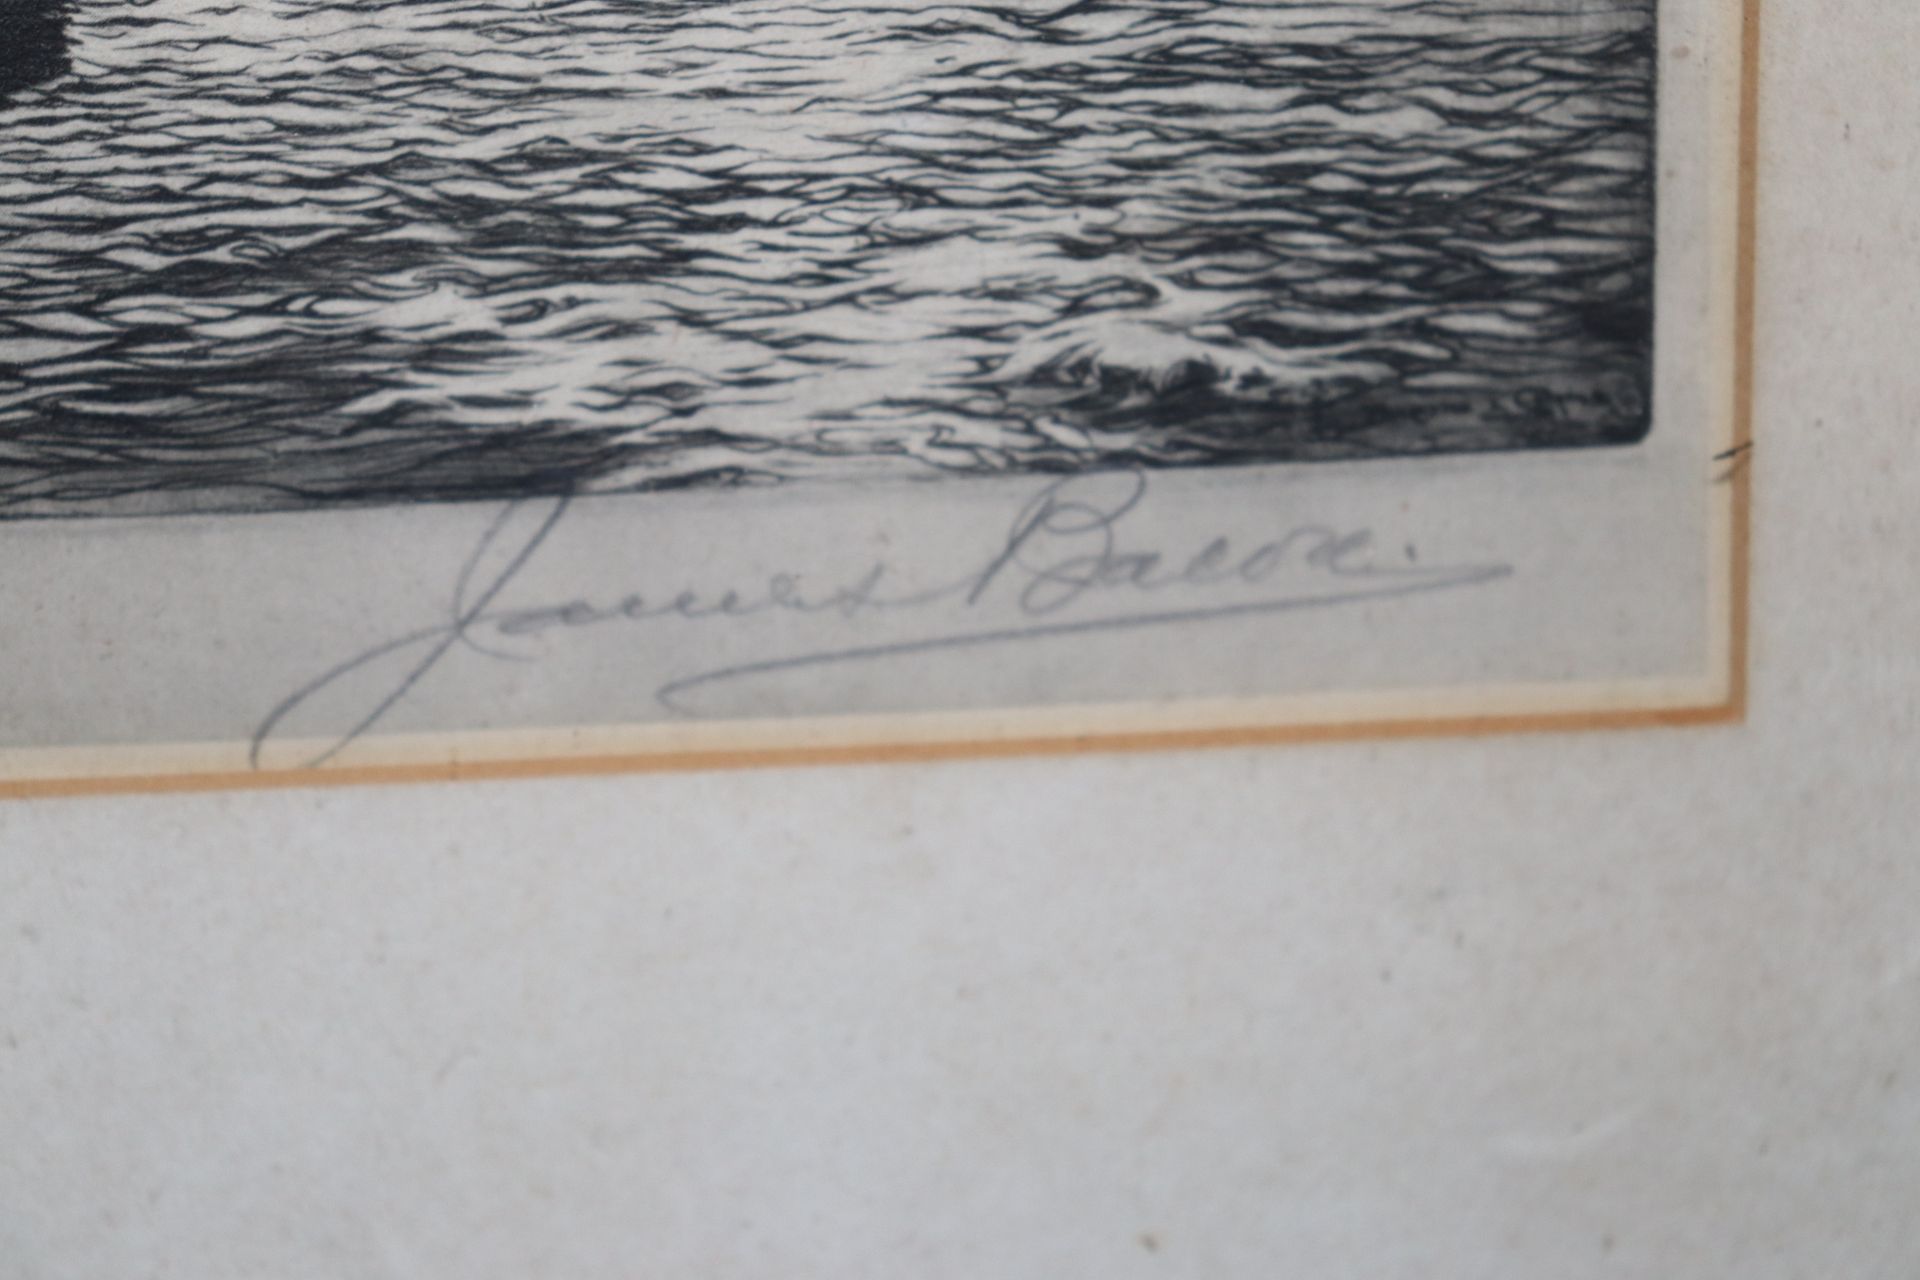 James Baker, pencil signed Pool of London print - Image 3 of 4